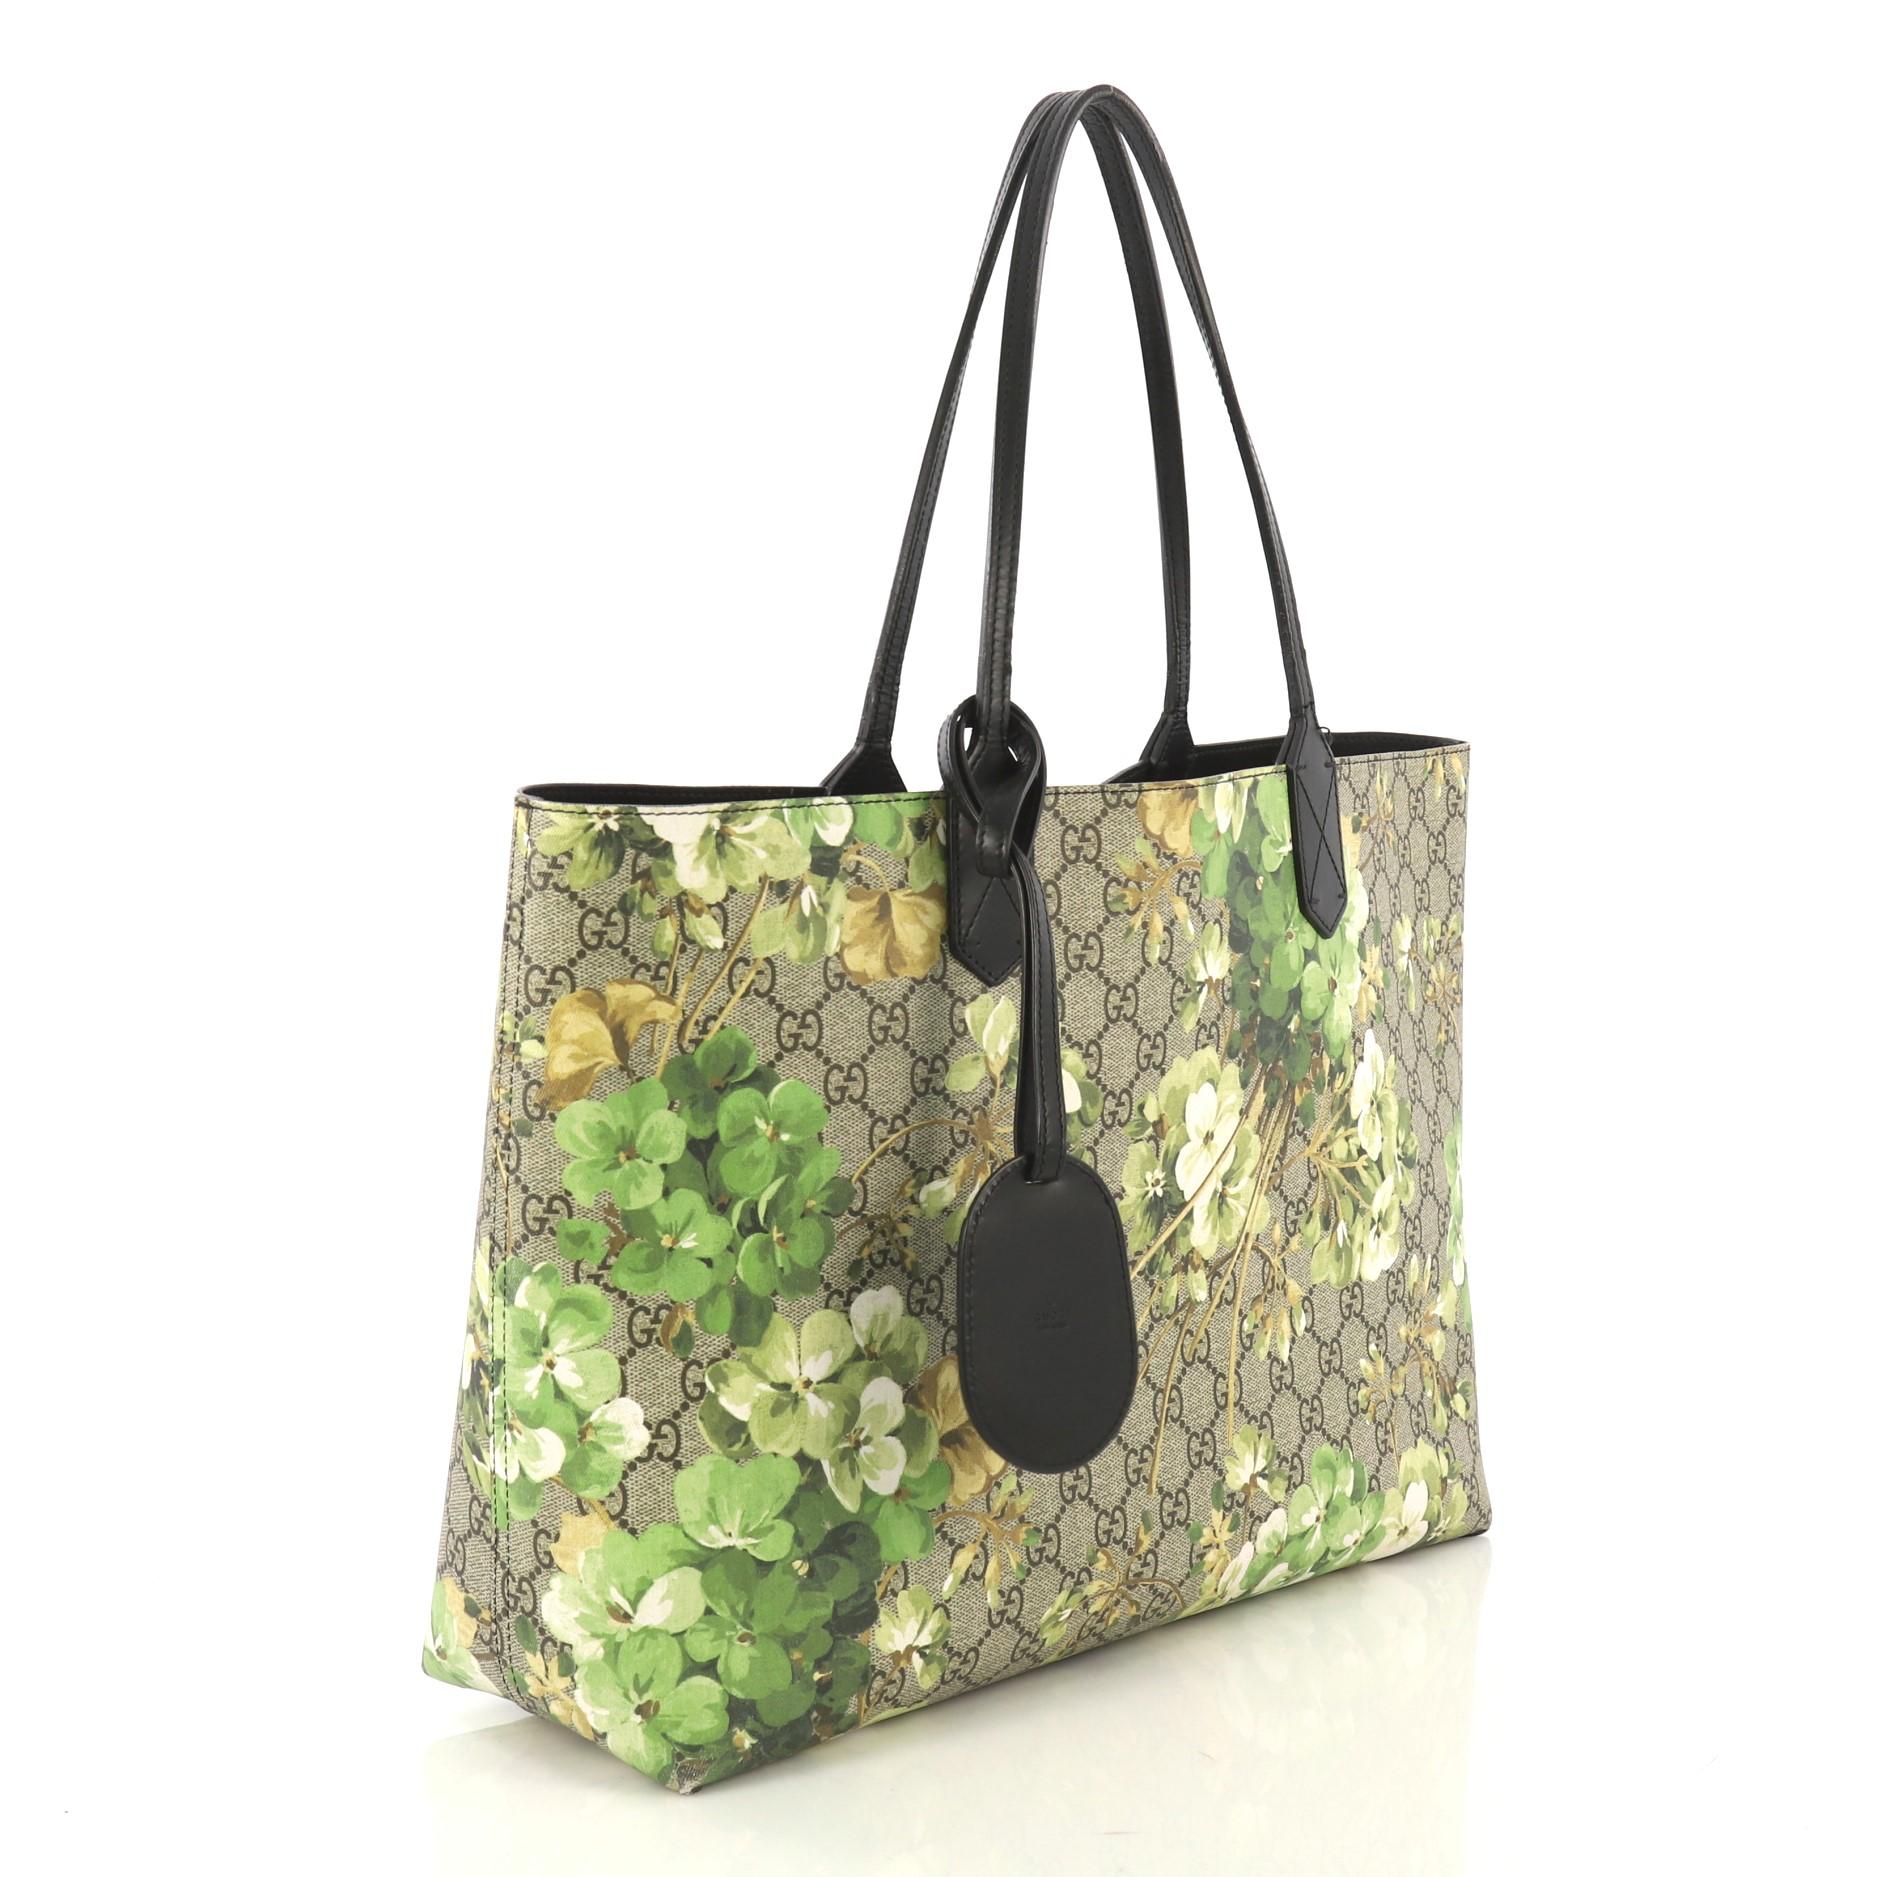 This Gucci Reversible Tote Blooms GG Print Leather Medium, crafted from green blooms GG print leather, features tall slim handles and subtle Gucci logo. Its wide top opens to a reversible black leather interior. 

Estimated Retail Price: